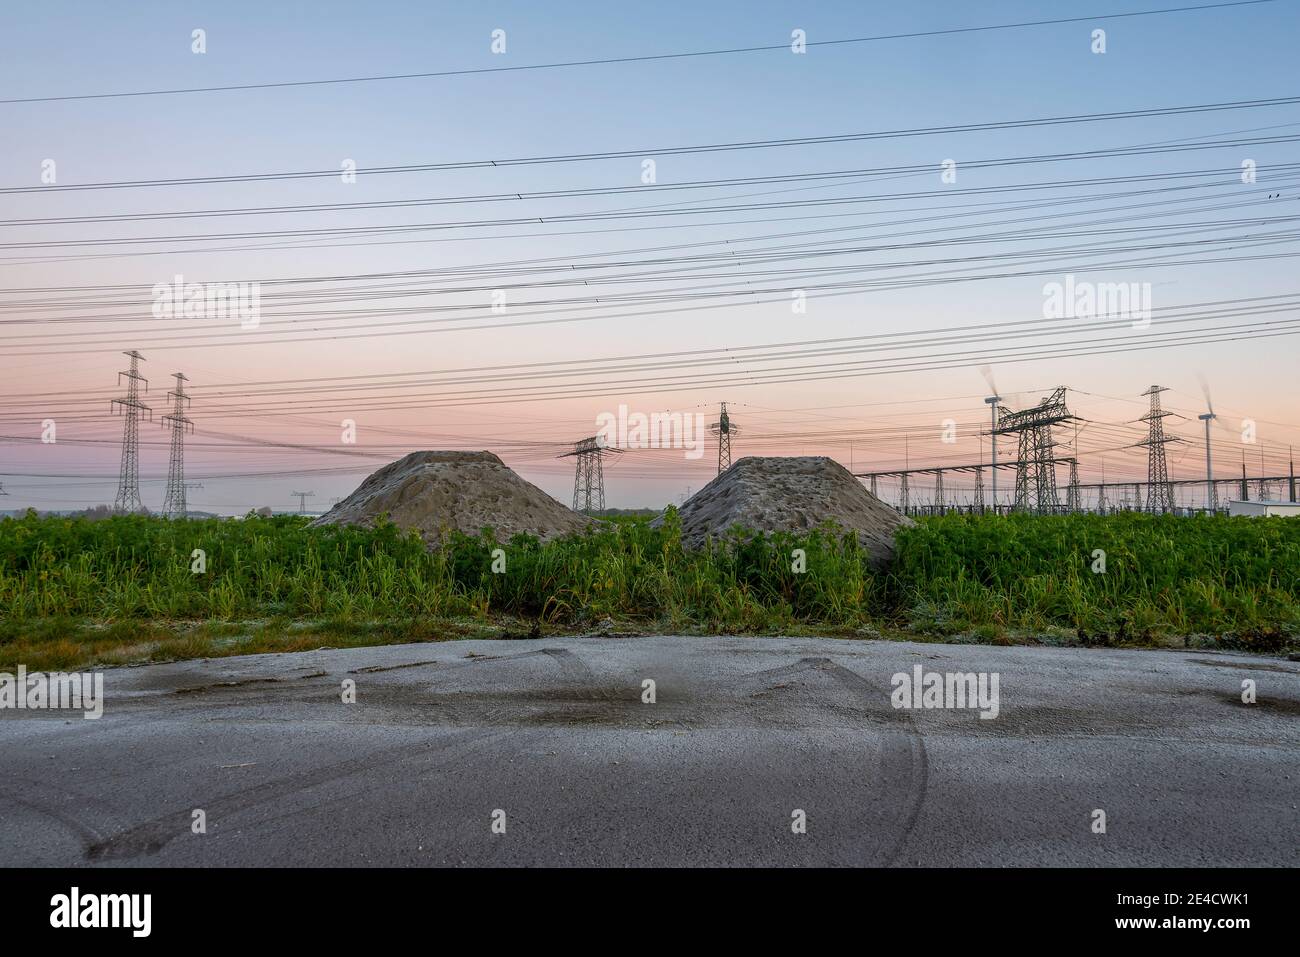 Heavy current pylons, electricity pylons, power lines, Wolmirstedt substation, Saxony-Anhalt, Germany Stock Photo